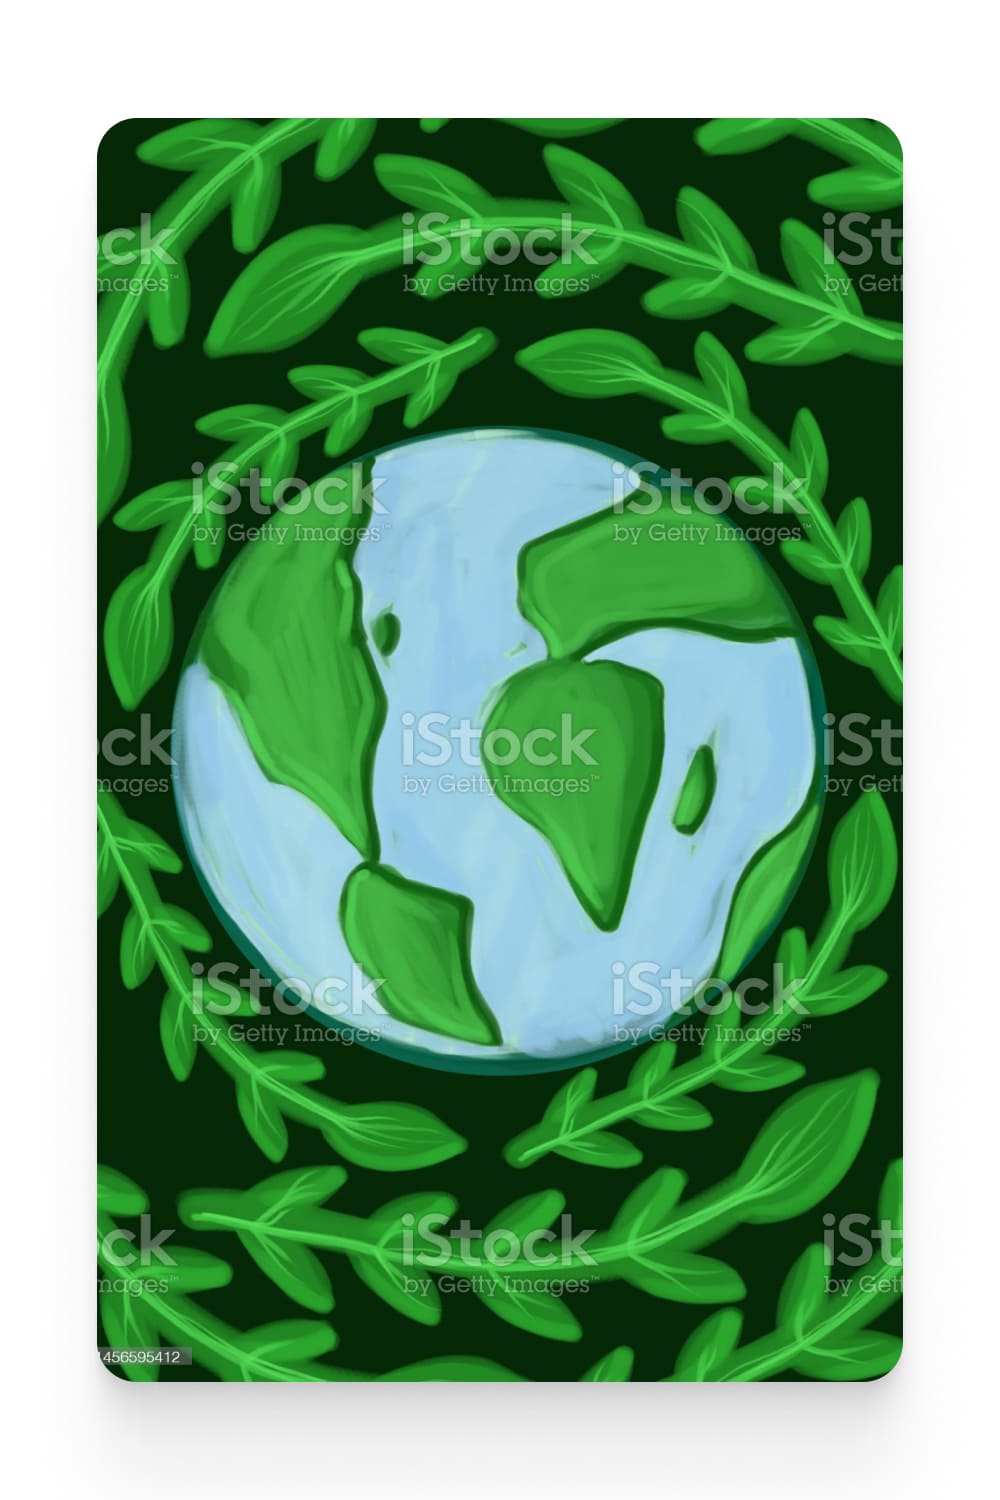 Drawn planet earth surrounded by branches with leaves.